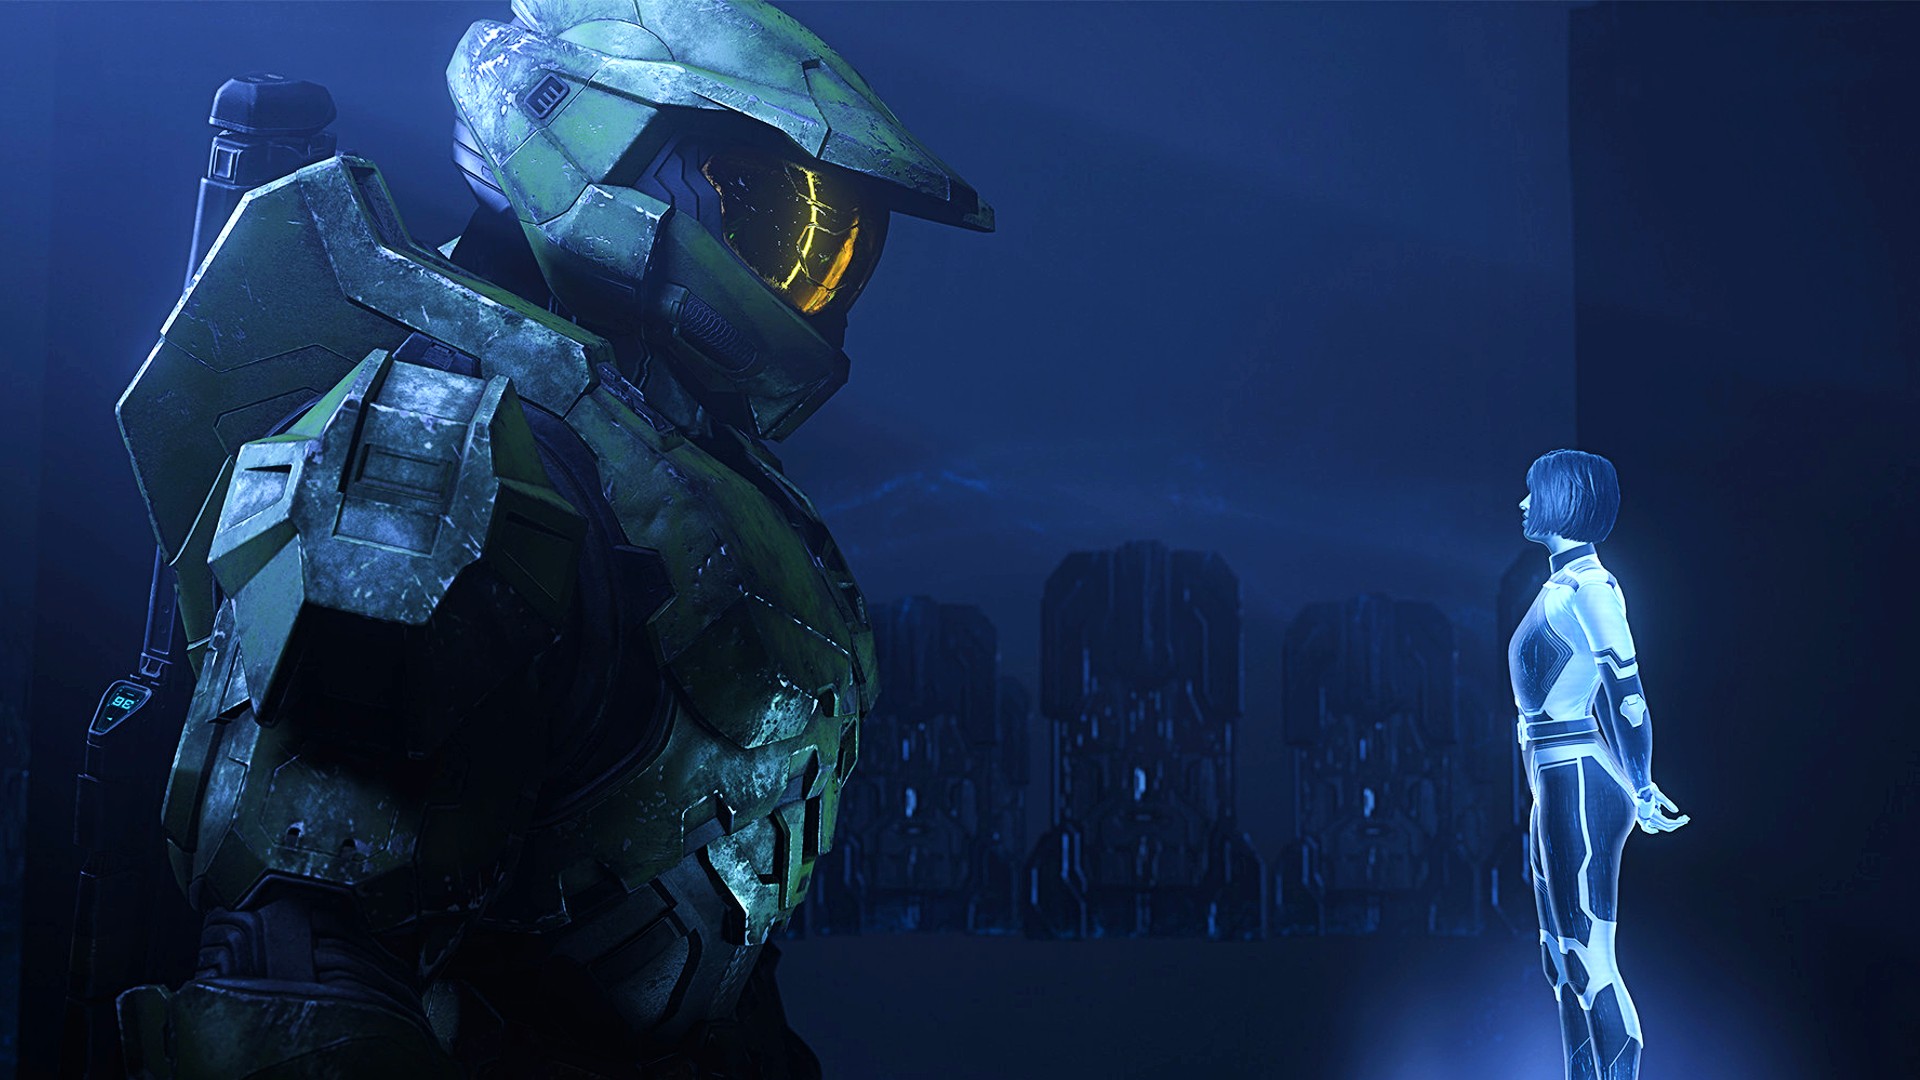 Halo Infinite's co-op campaign isn't arriving until May 2022 at best